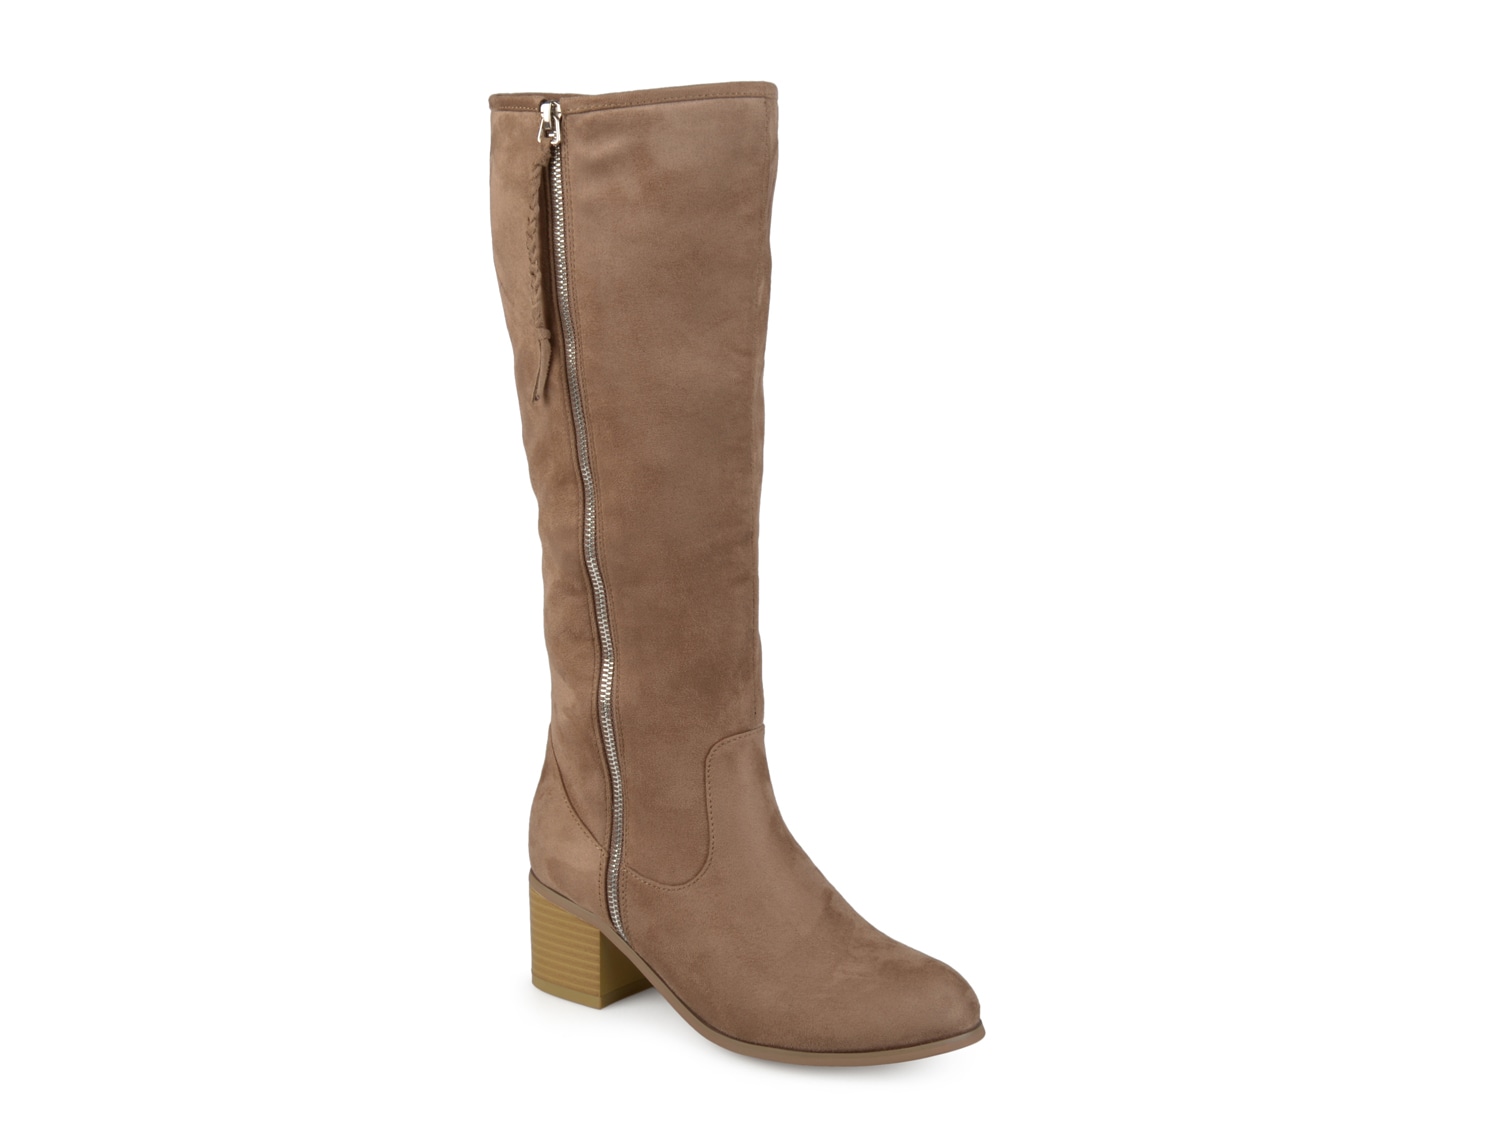 Journee Collection Sanora Wide Calf Boot - Free Shipping | DSW